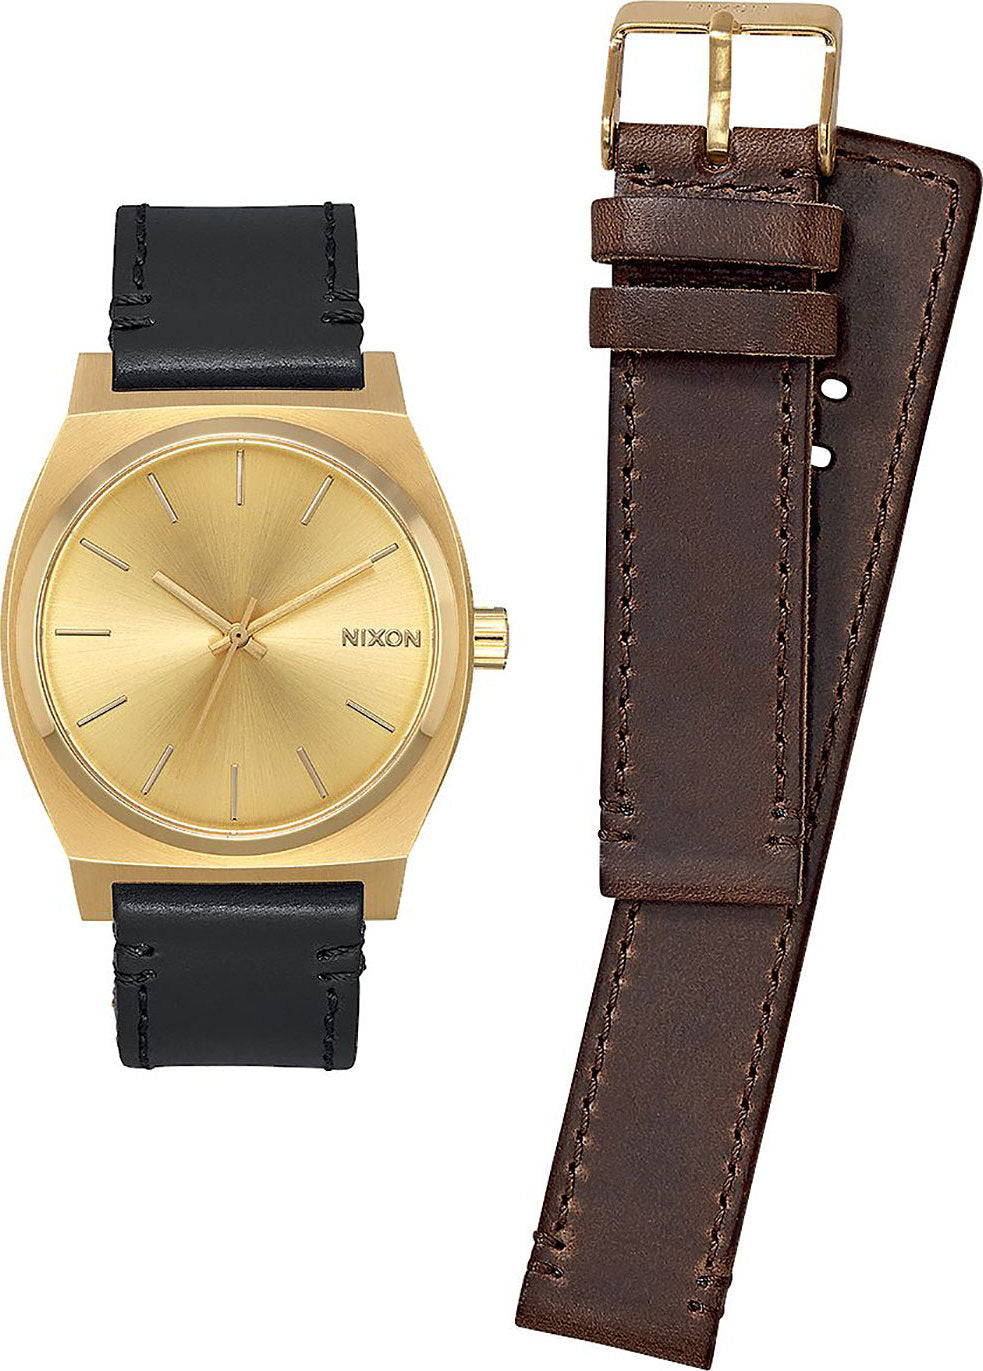 Nixon Time Teller Double Strap Gift Pack - All Gold - Black - Brown ...